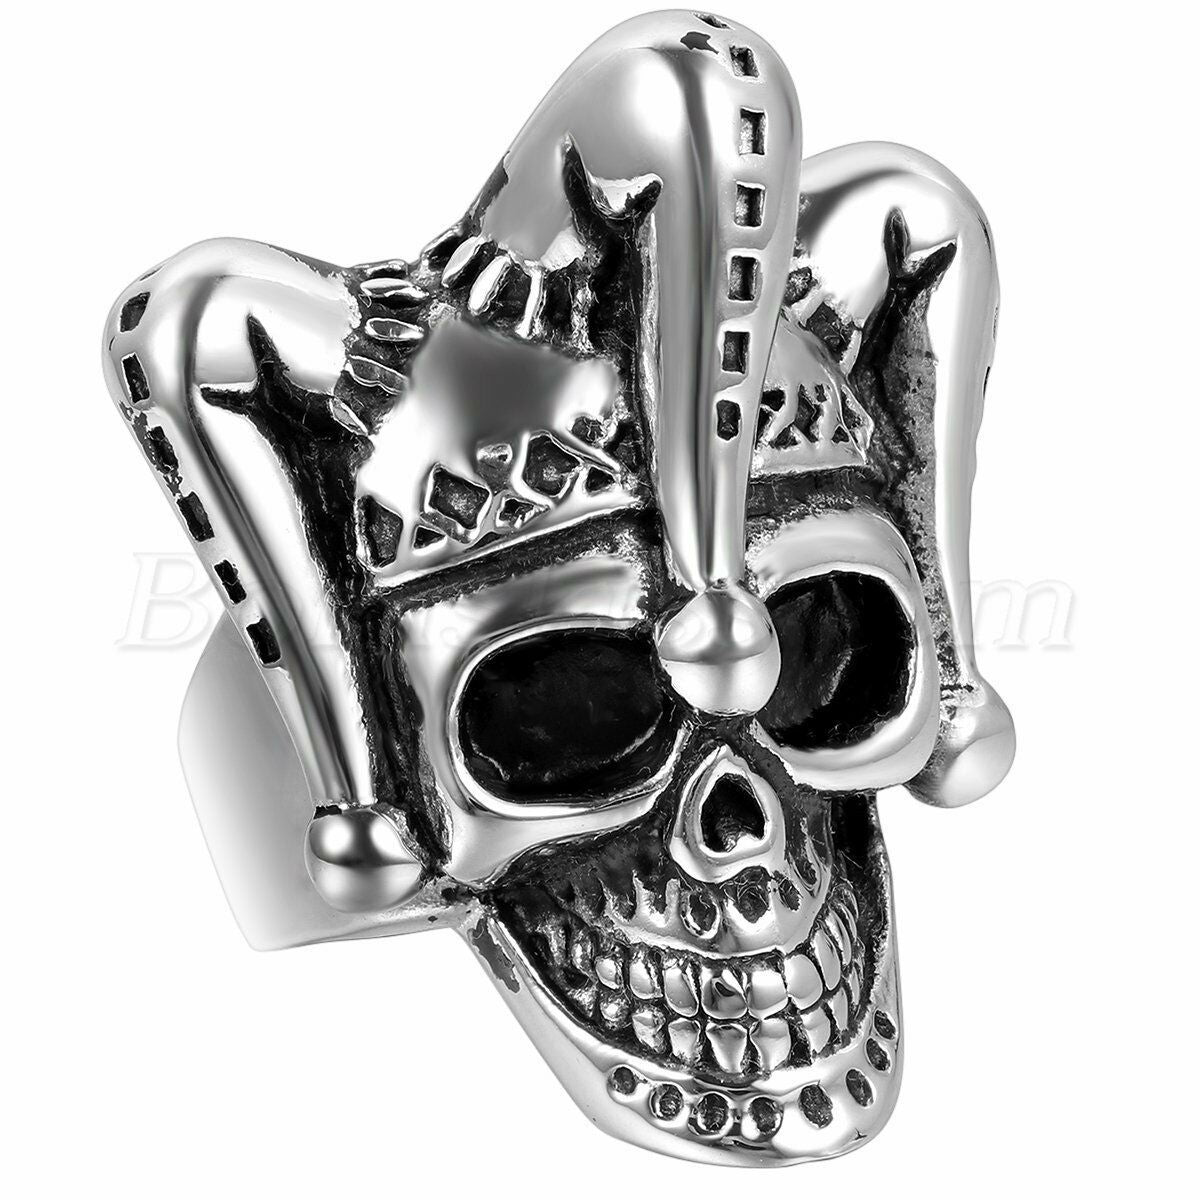 A Stainless Steel Gothic Men's Ring with a skull on it made by Maramalive™.